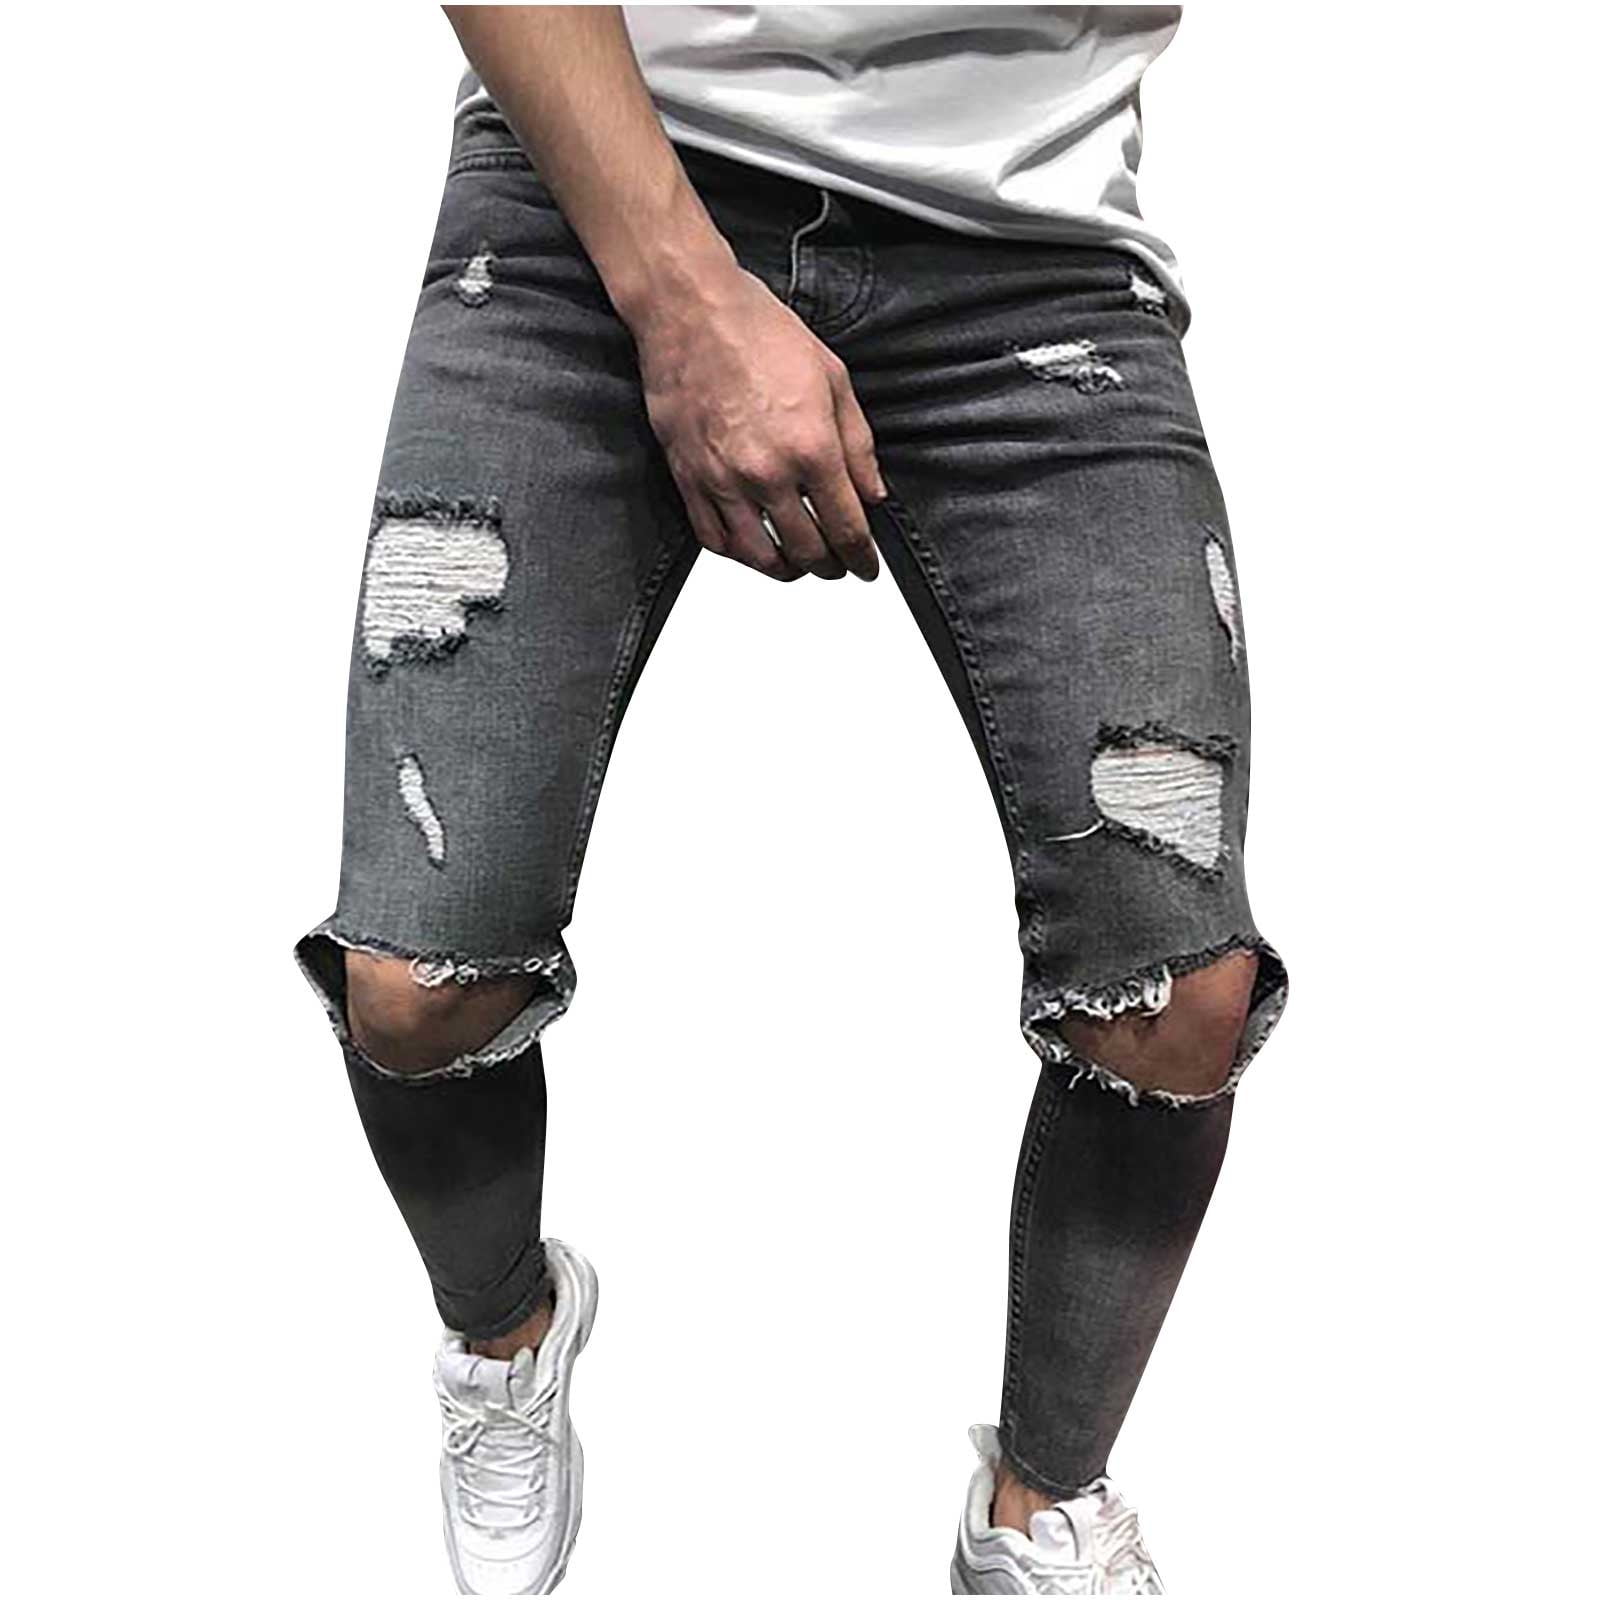 Mens Sweatpants Men Casual Fashion Pure Button Zipper Custom Fit Irregular  Ripped Jeans Mens Cargo Pants Baggy Jeans on Sales Gray 2XL 